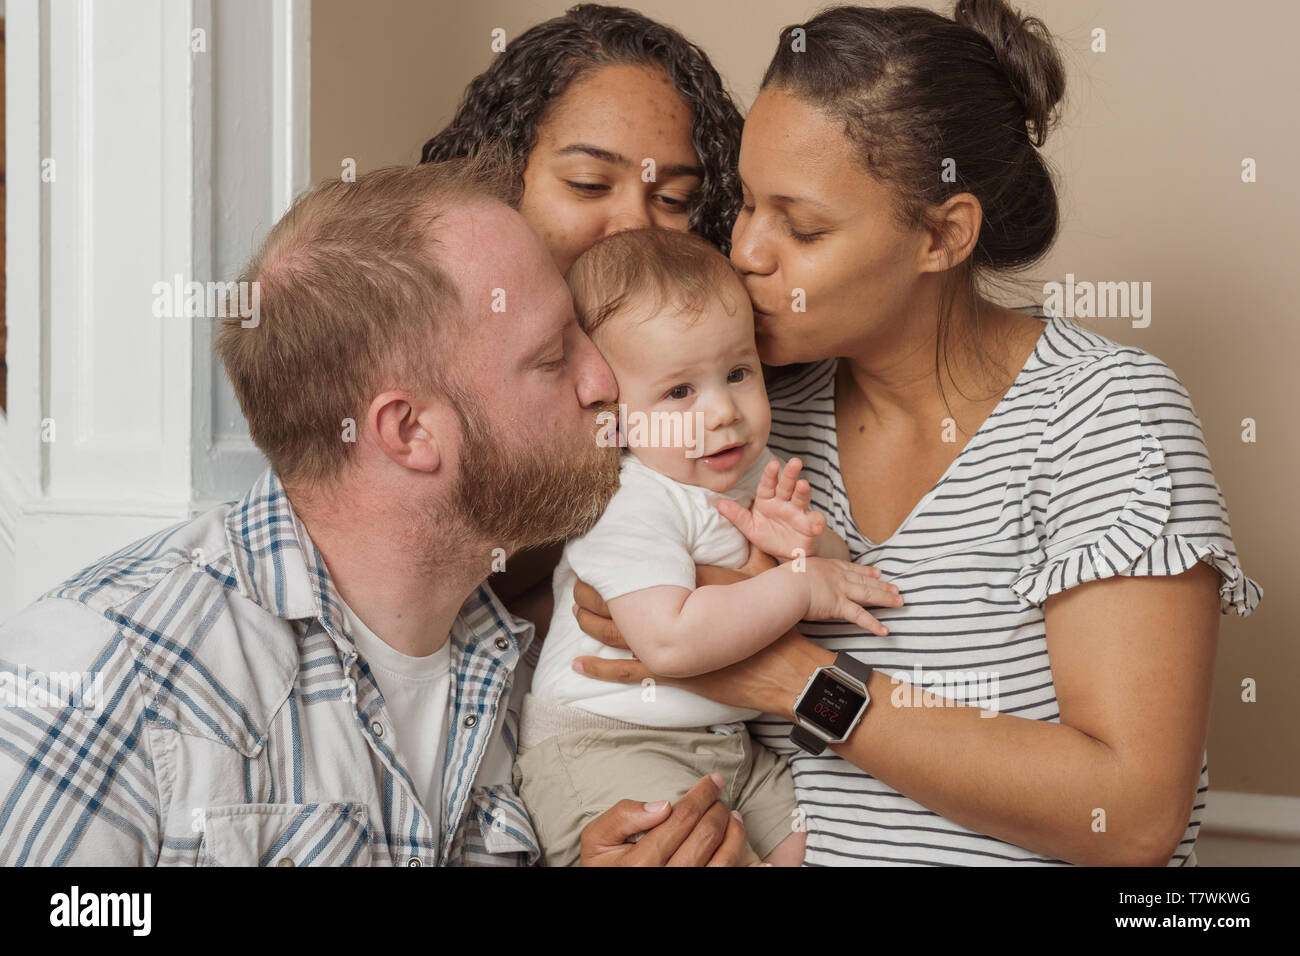 family of  4 in their home north Philadelphia, 6 month old baby, 15 year old sister and parents Stock Photo